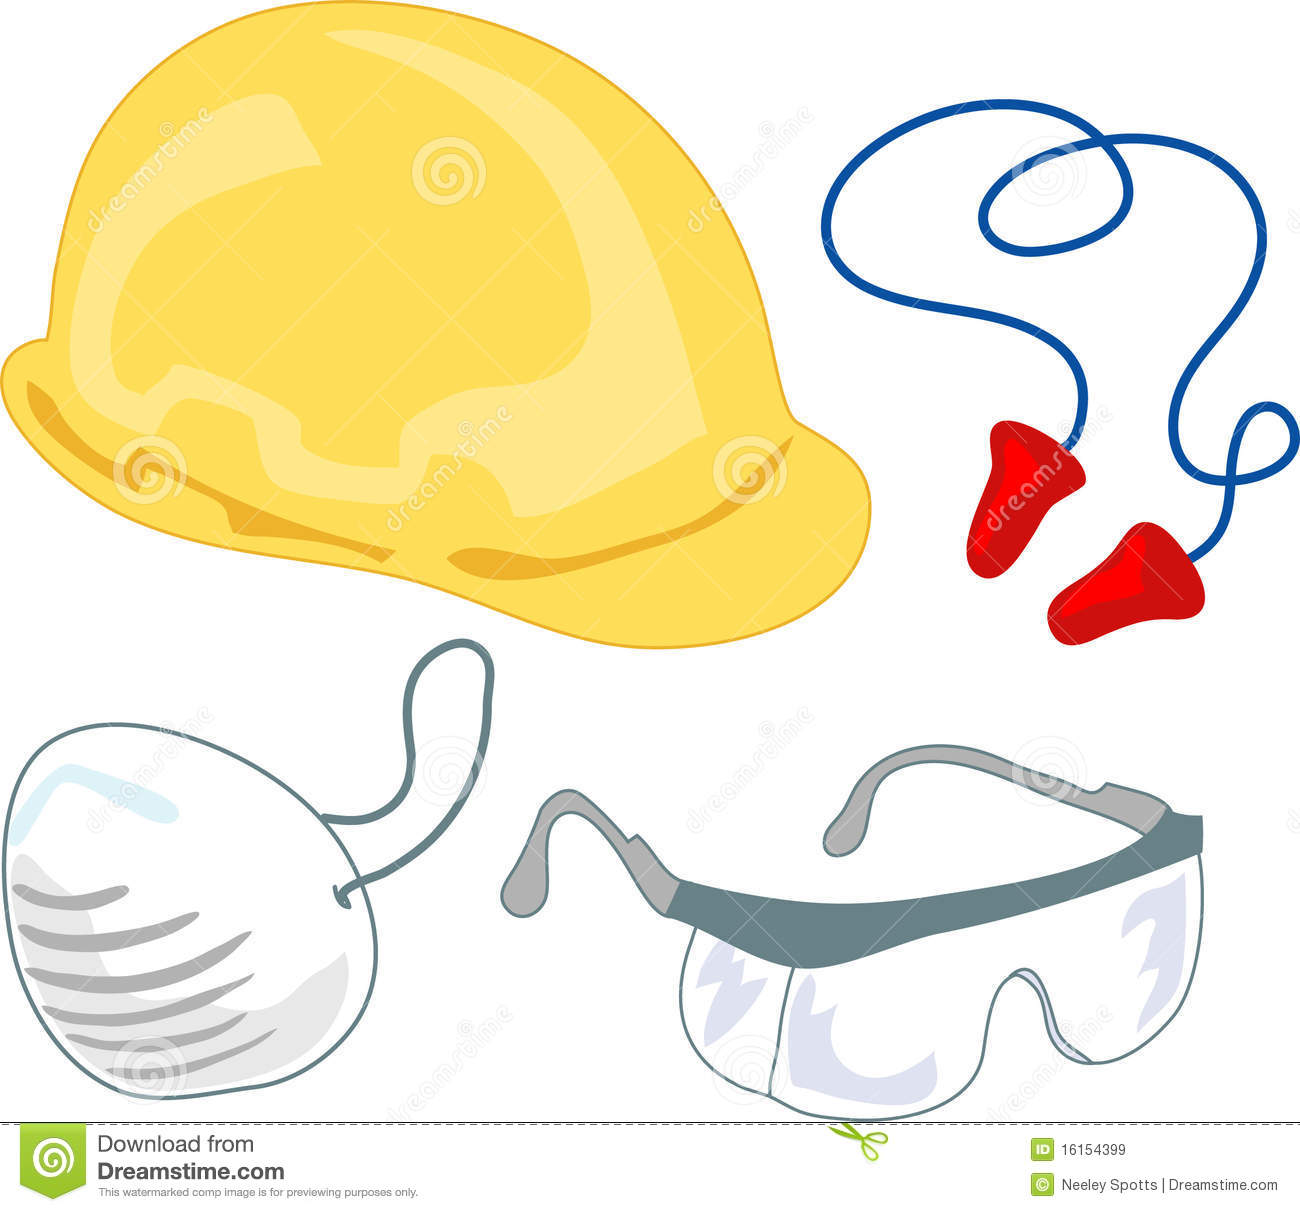 Common Safety Items  Hardhat Earplugs Safety Glasses